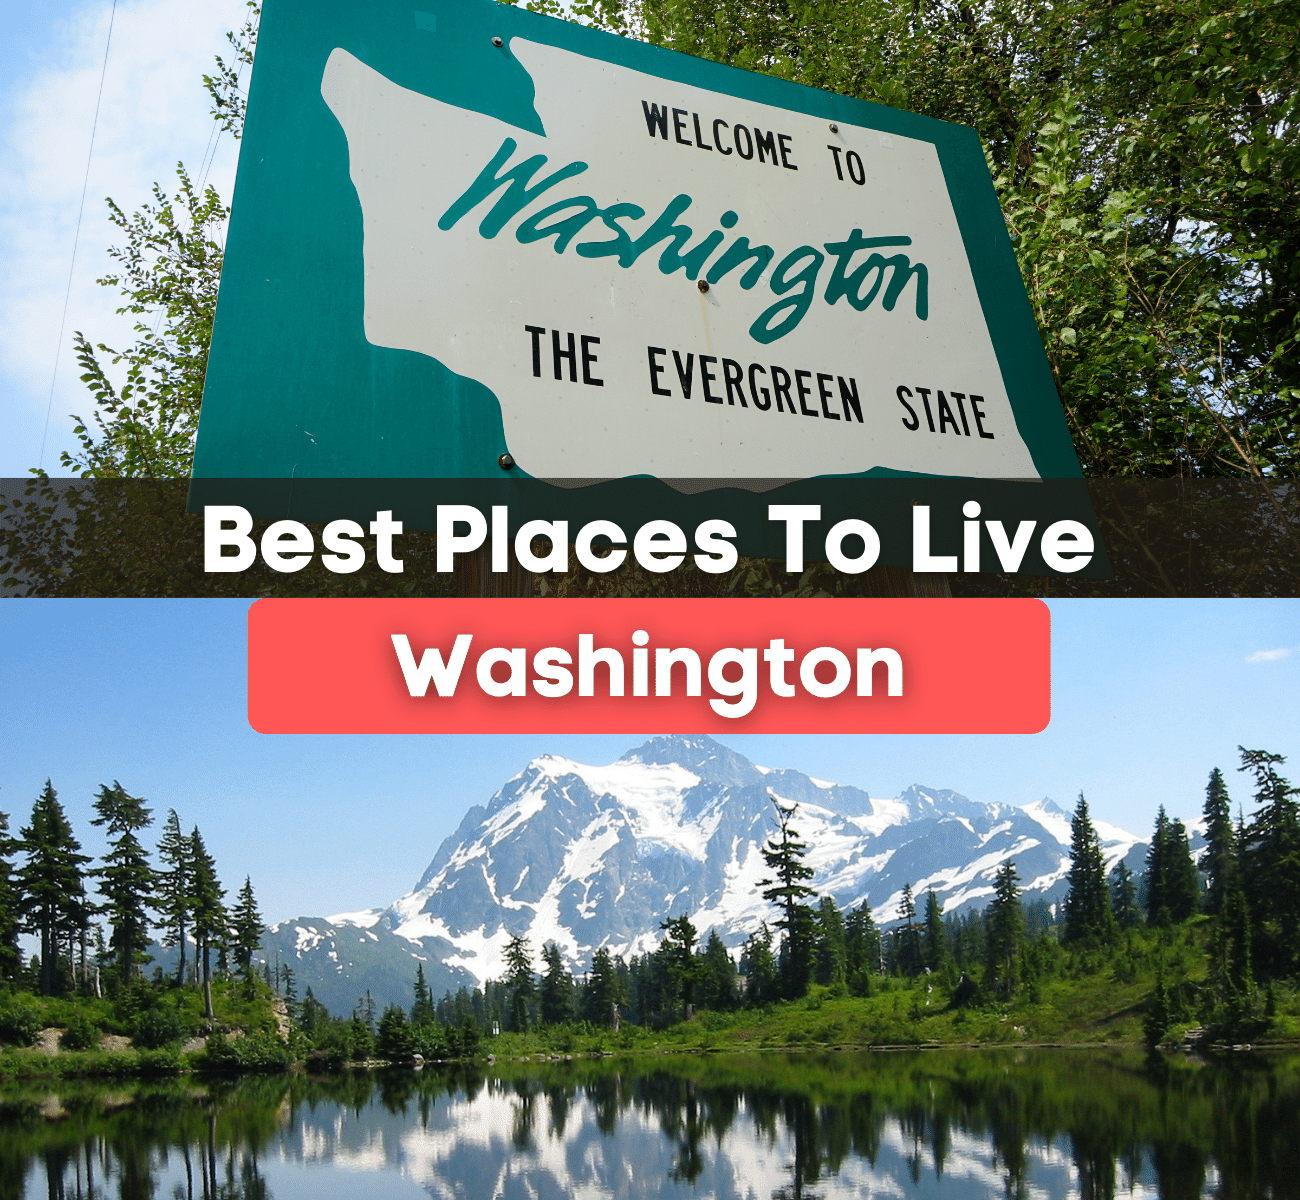 Moving to Washington state sign and Mount Rainer 